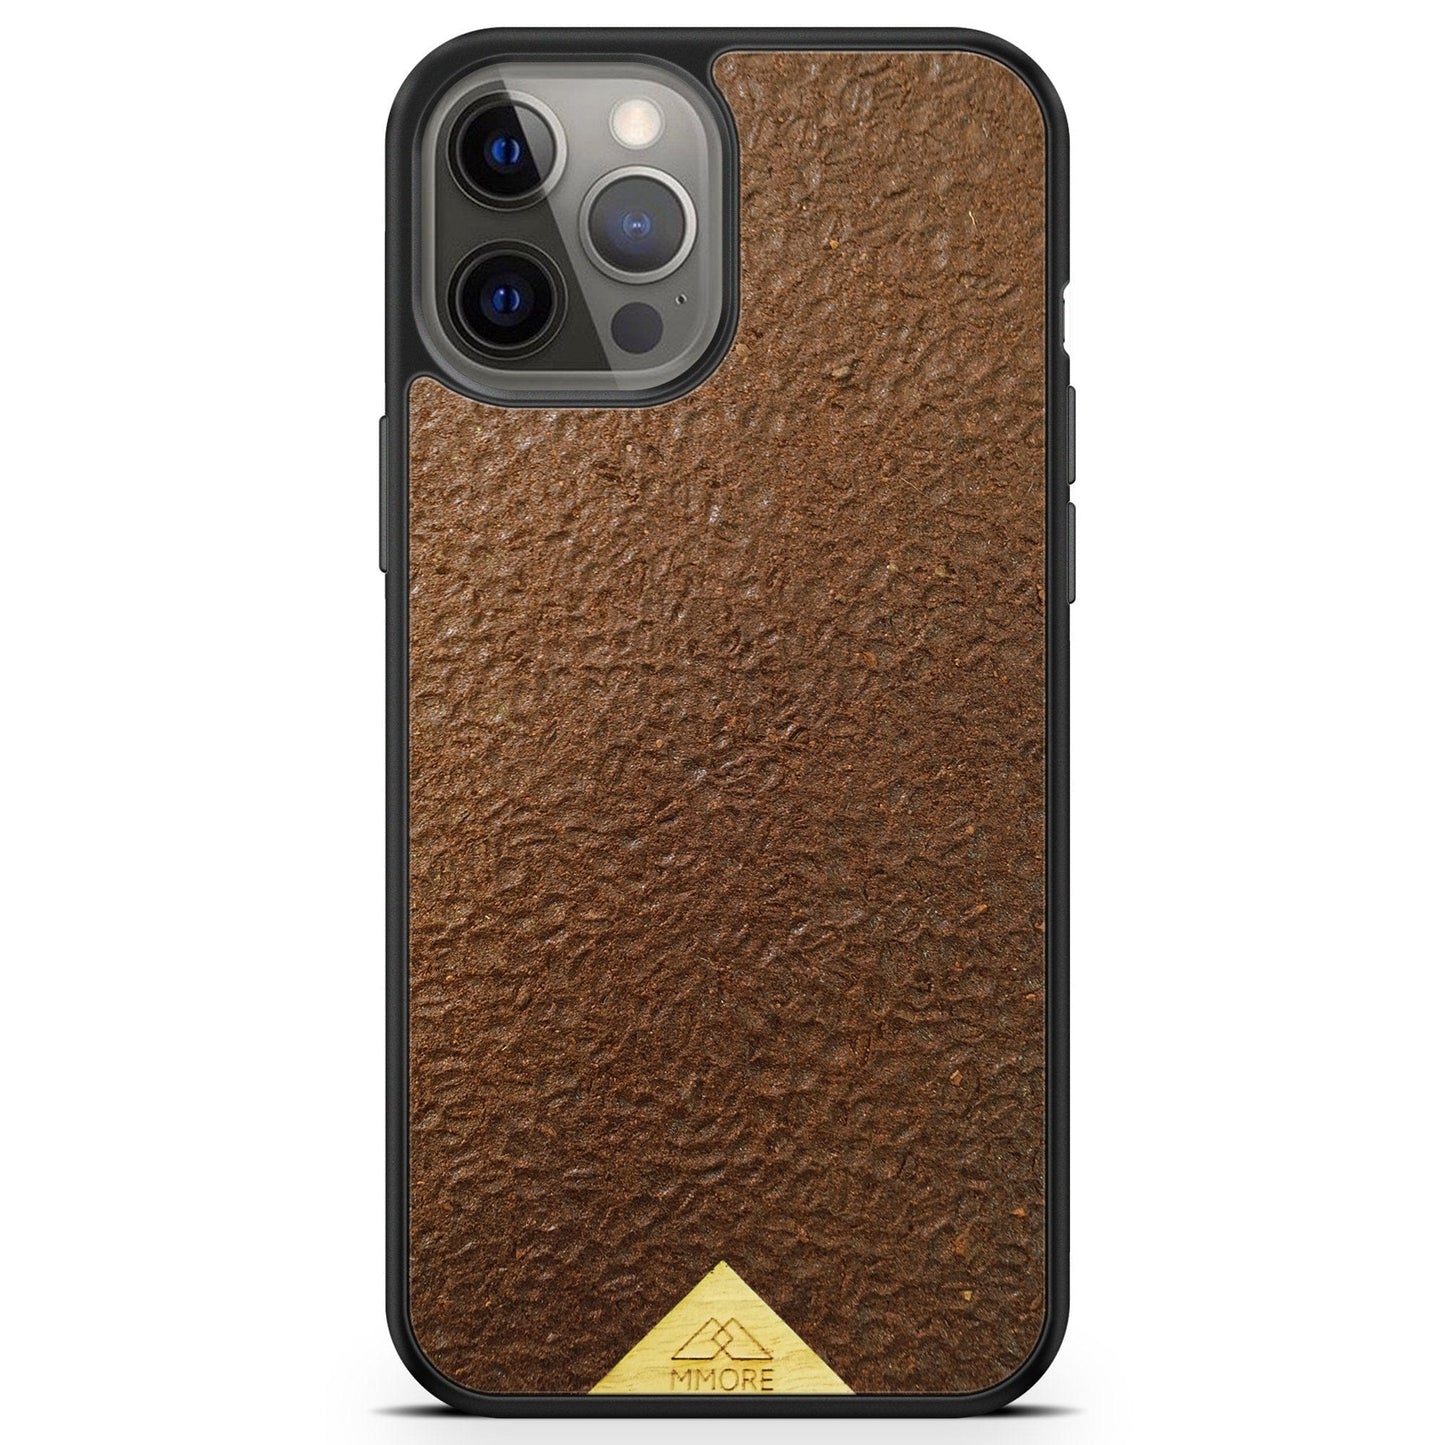 Aromatic Organic Mobile Phone Case - Coffee - Mag Safe compatible - Premium Mobile Phone Cases - Shop now at San Rocco Italia